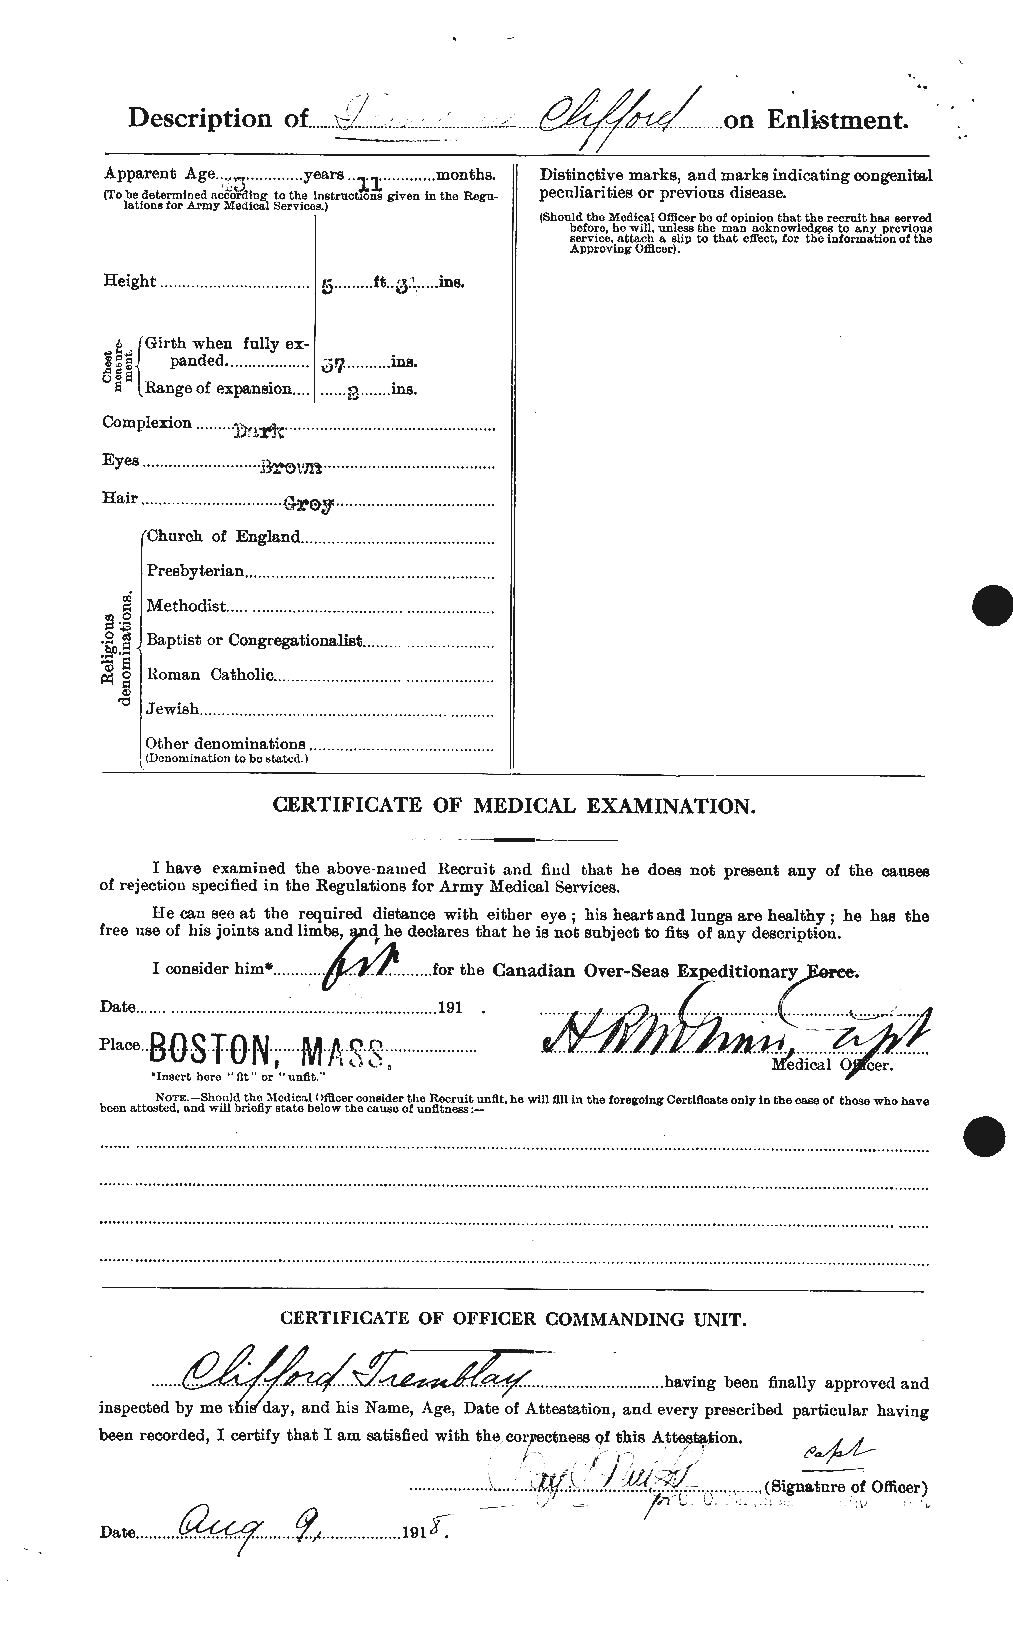 Personnel Records of the First World War - CEF 638987b